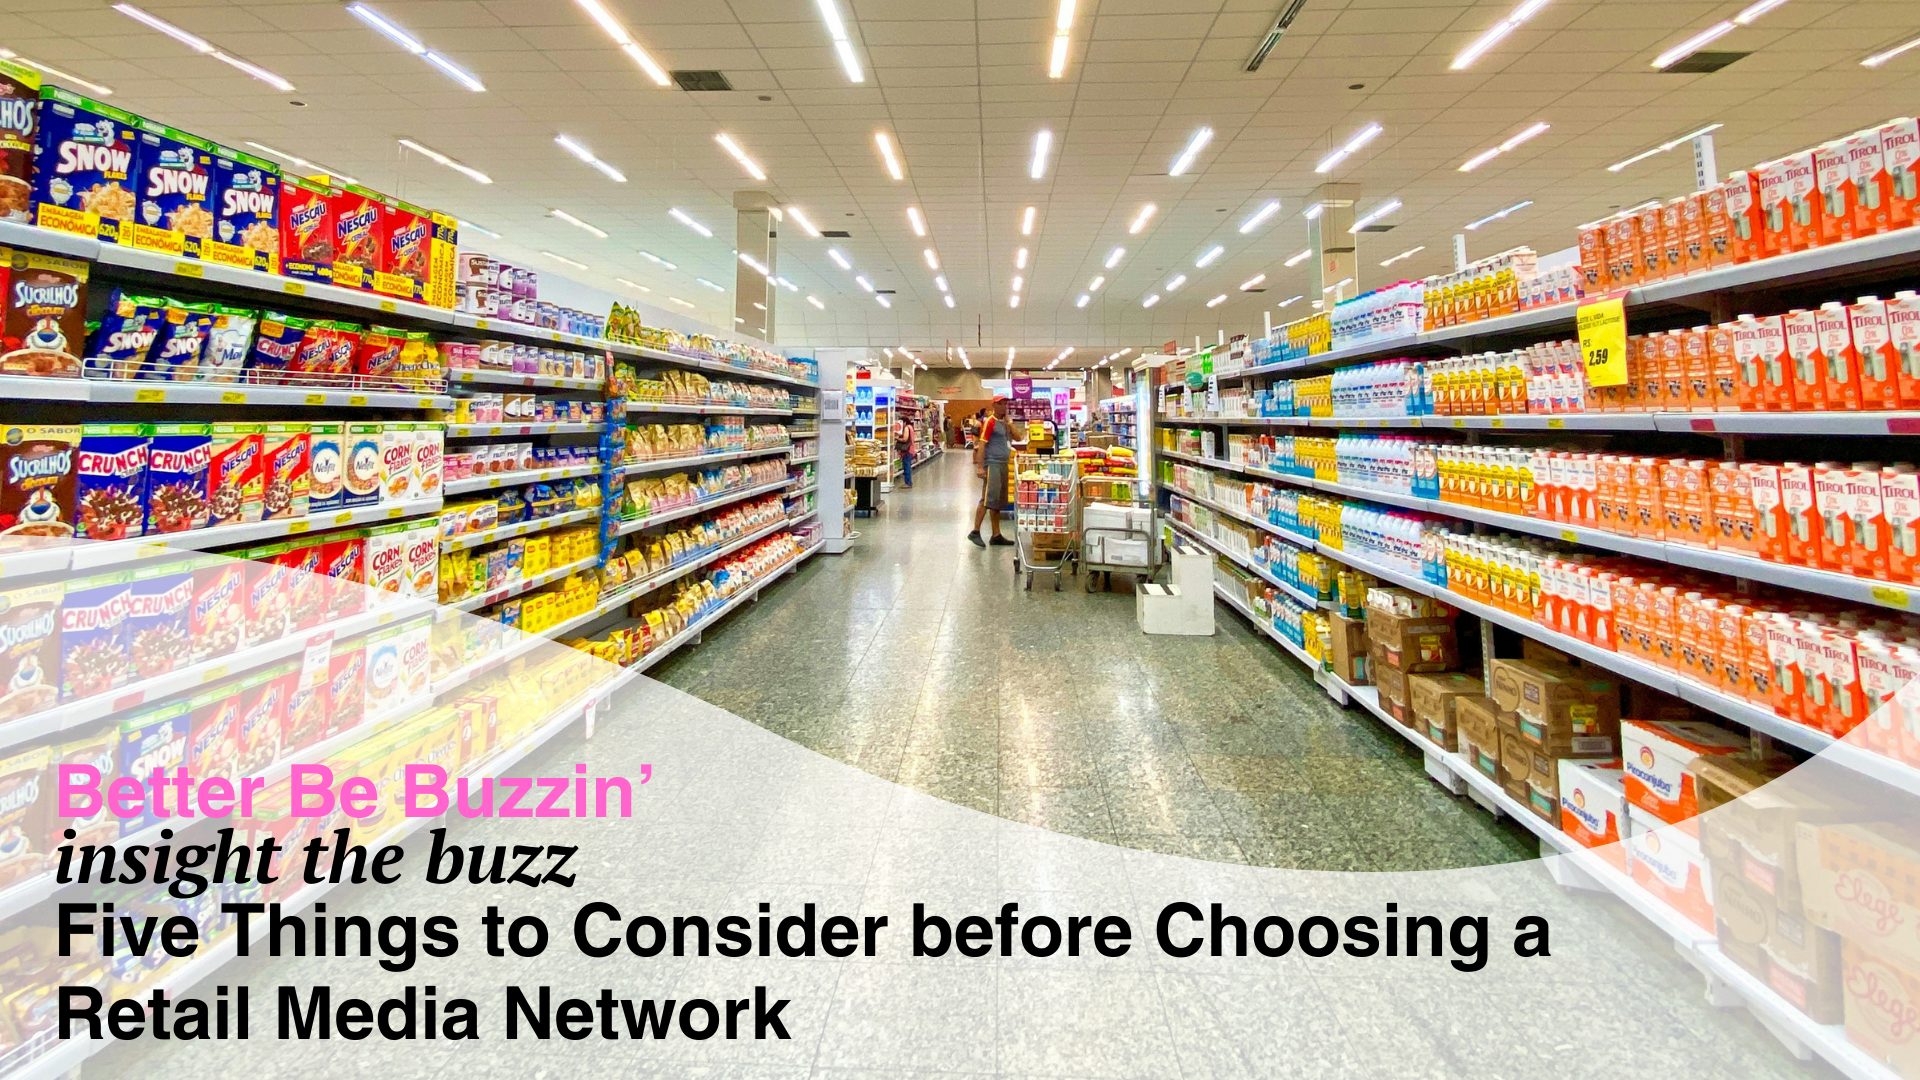 Better Be Buzzin insight the buzz five things to consider before choosing a retail media network